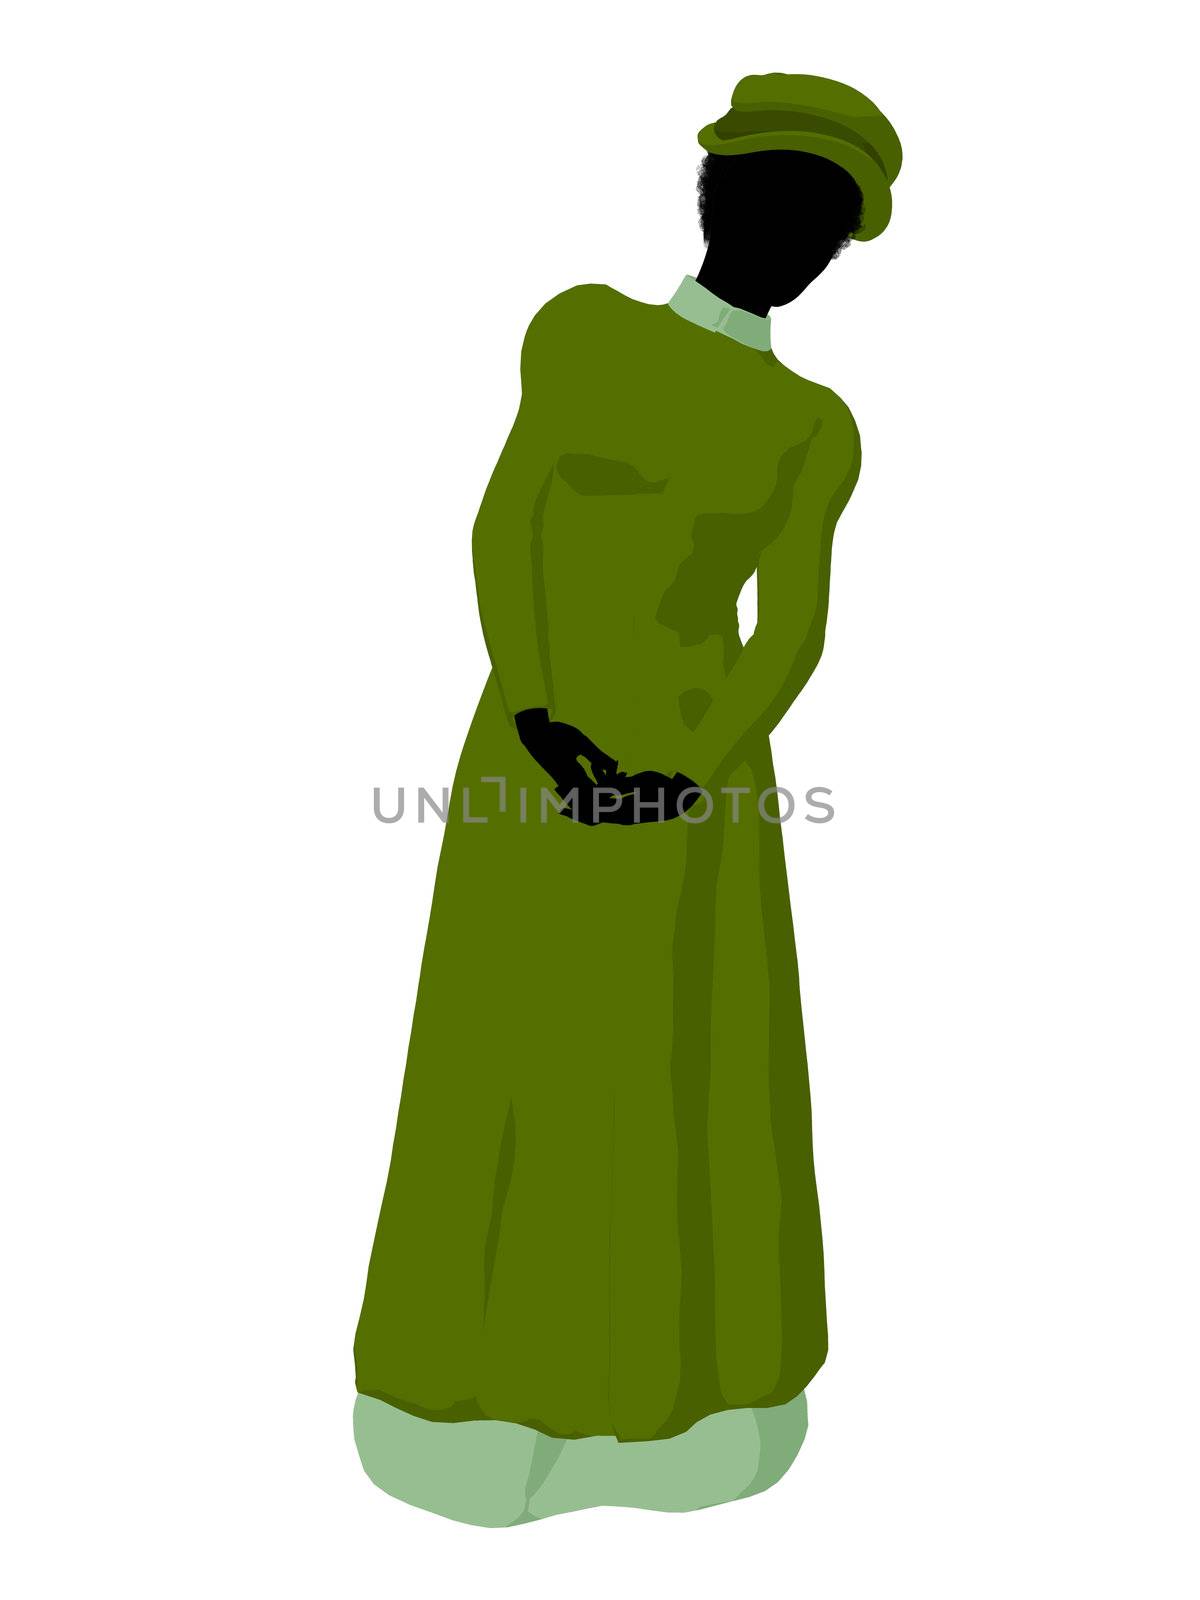 African American Victorian Woman Illustration Silhouette by kathygold